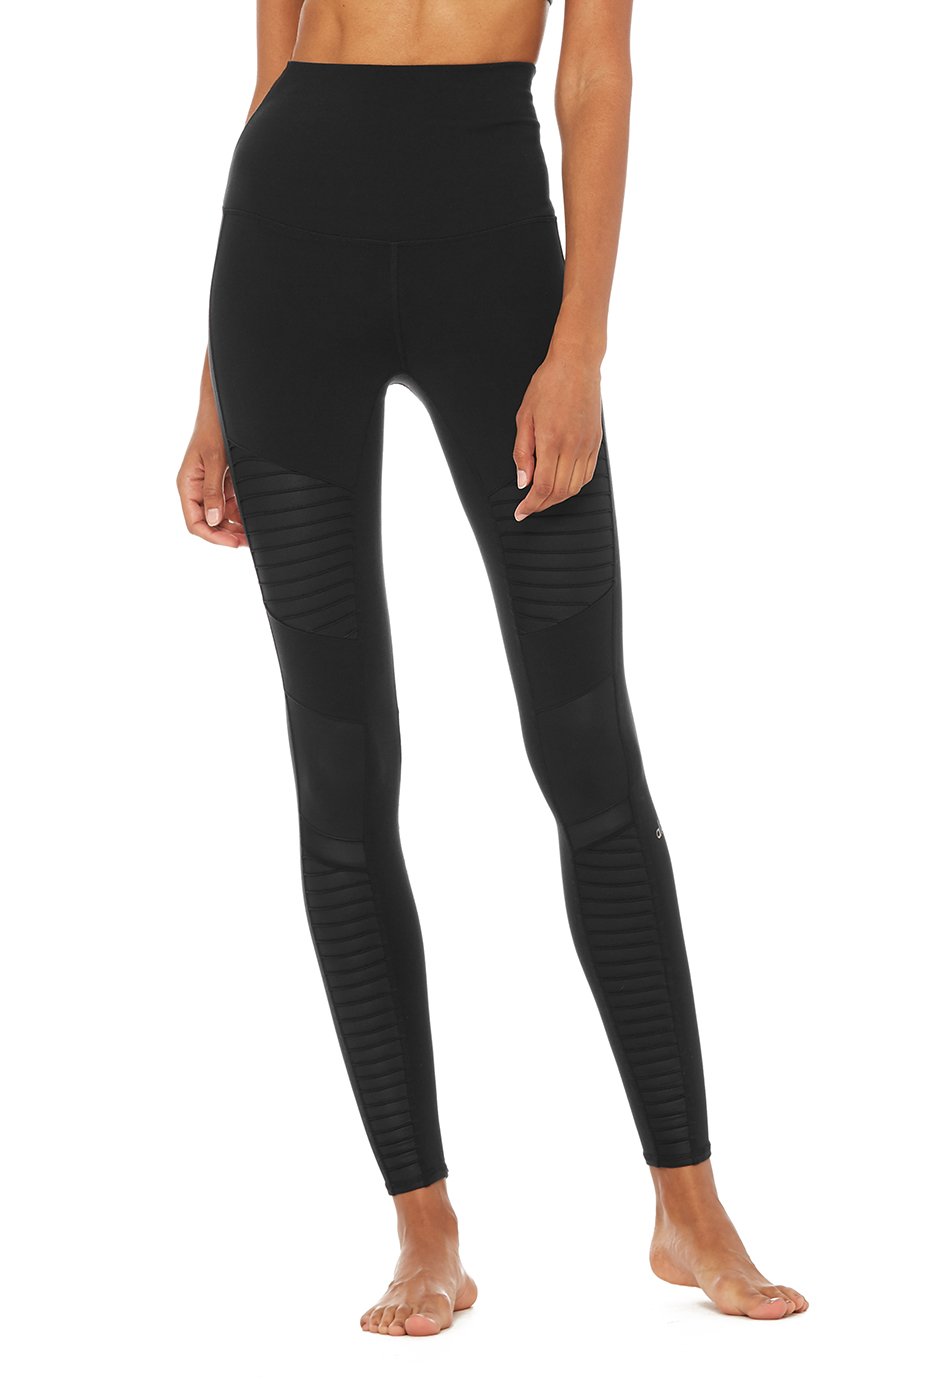 17 Leggings That Are 100% Squat-Proof (Because Yes, That's a Thing)